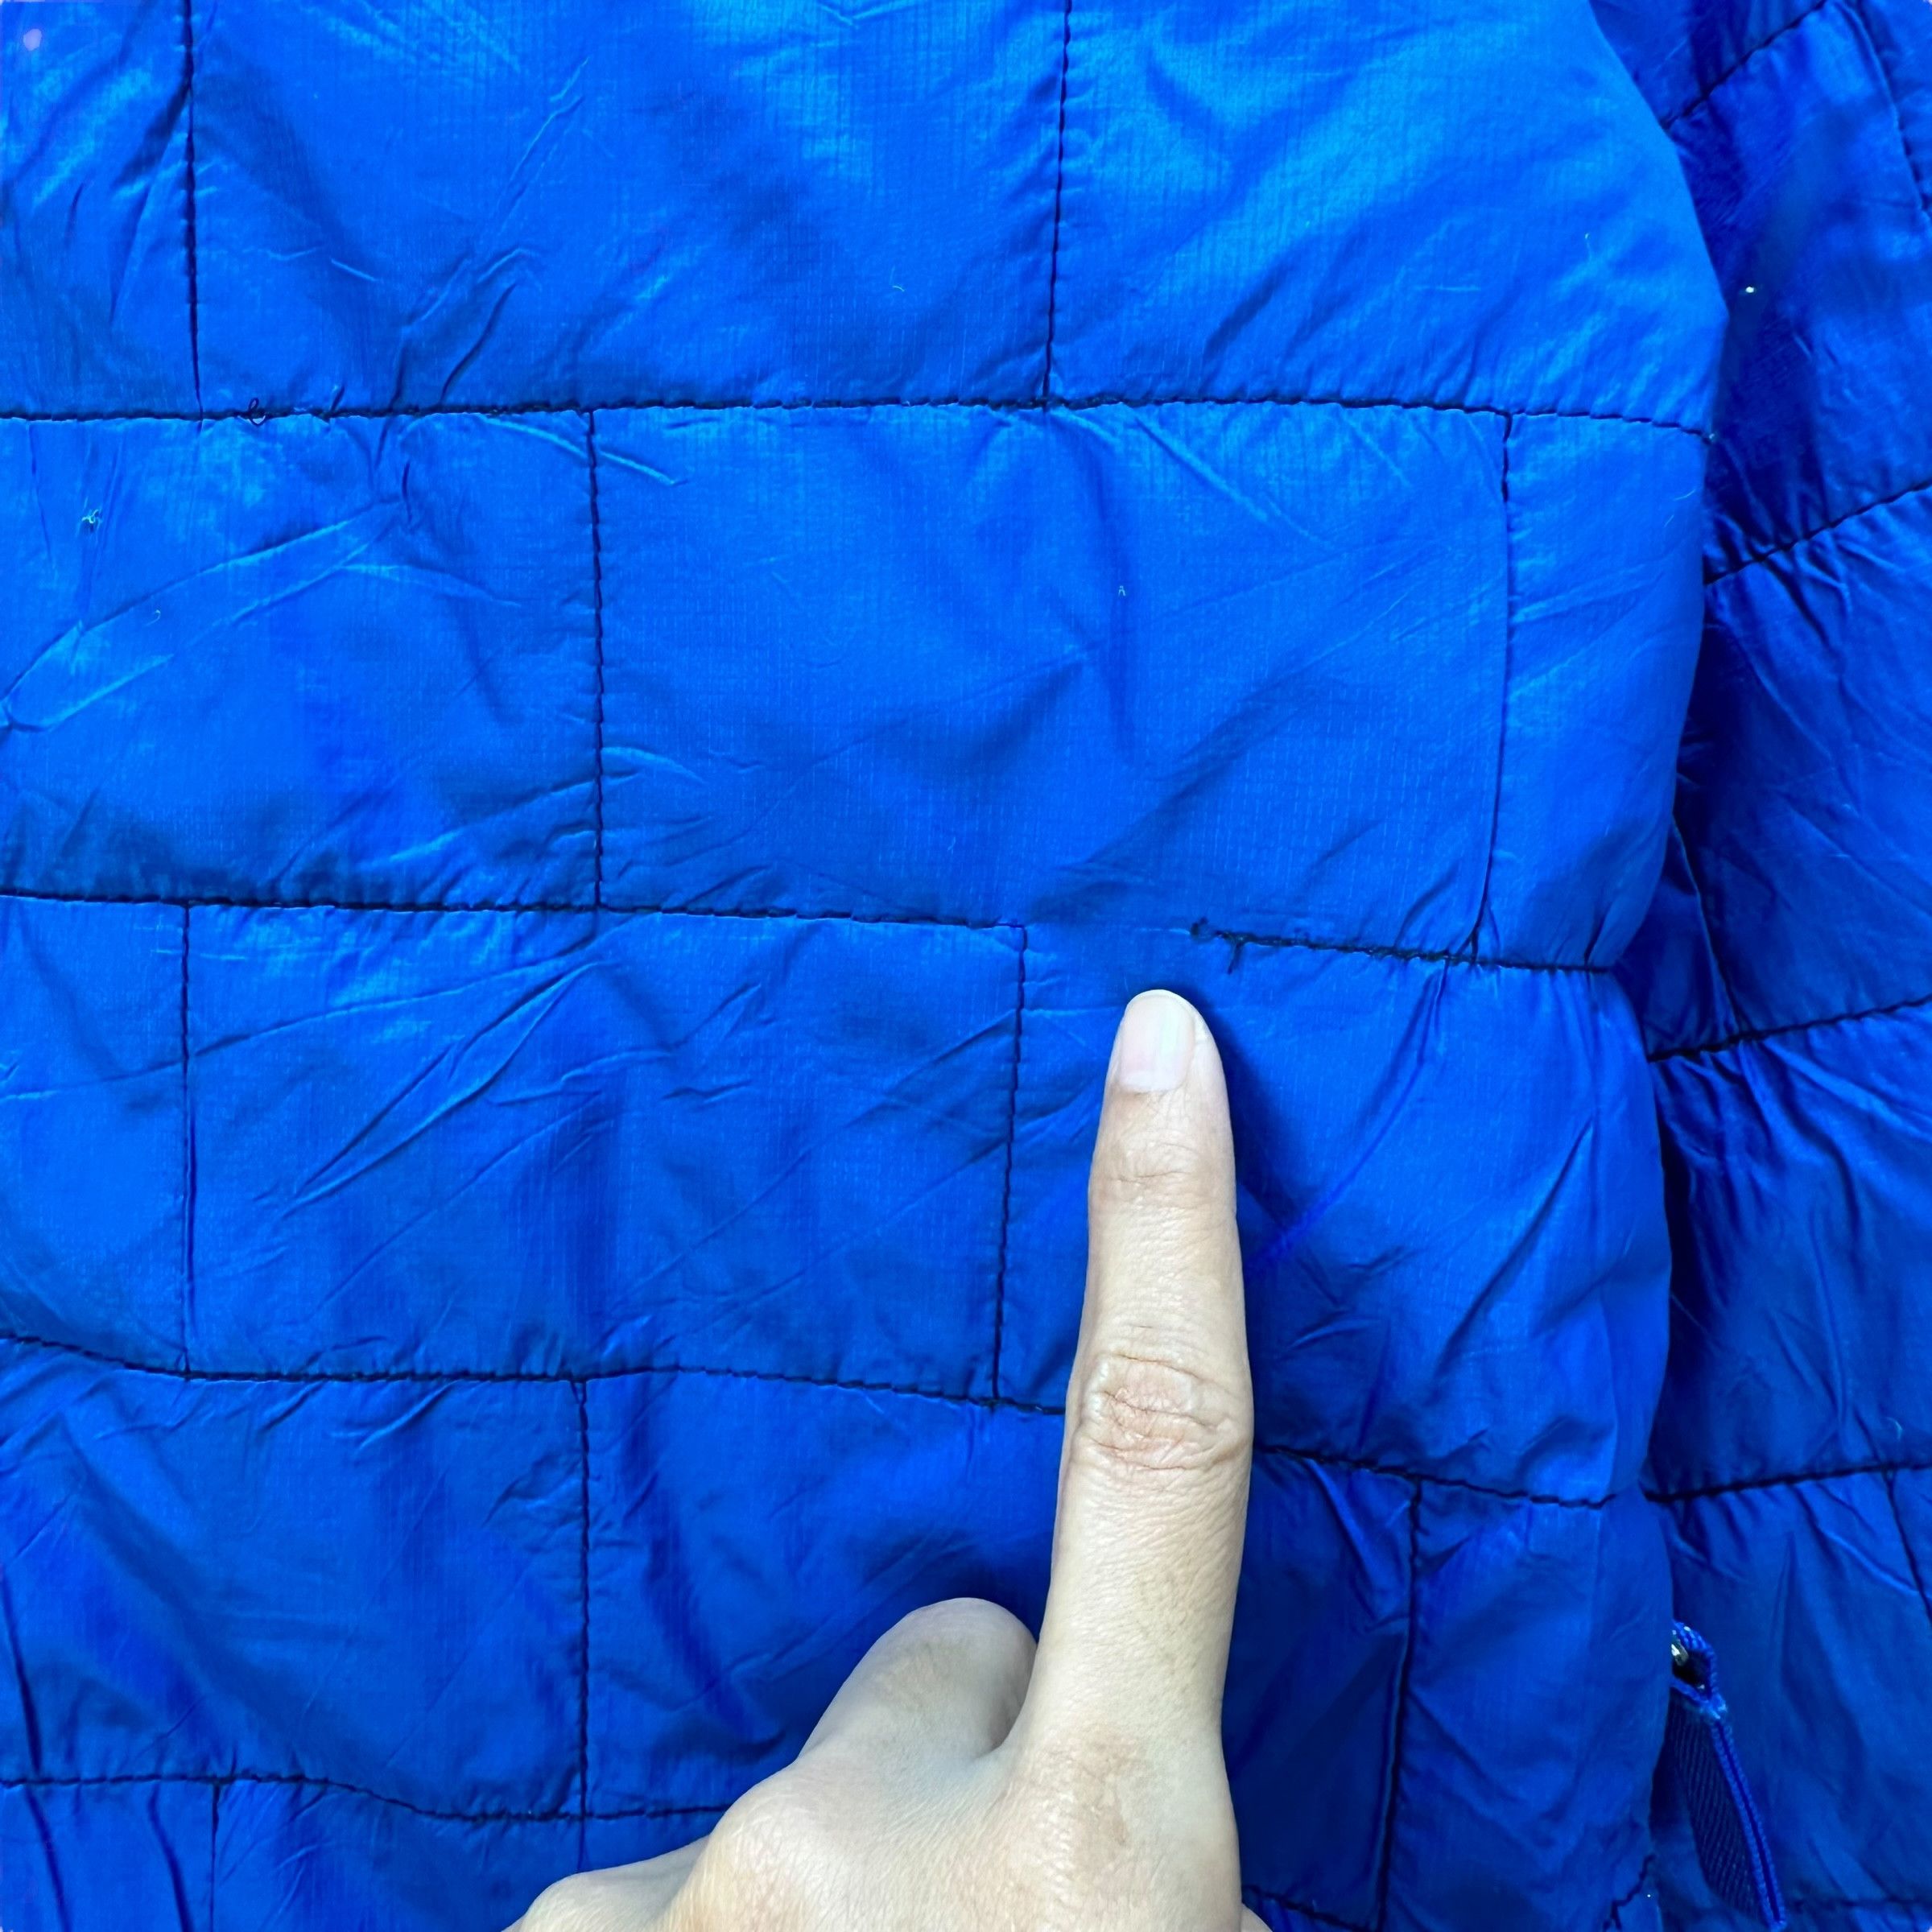 PATAGONIA LIGHT PUFFER JACKET IN BLUE FOR KIDS #9020-48 - 5